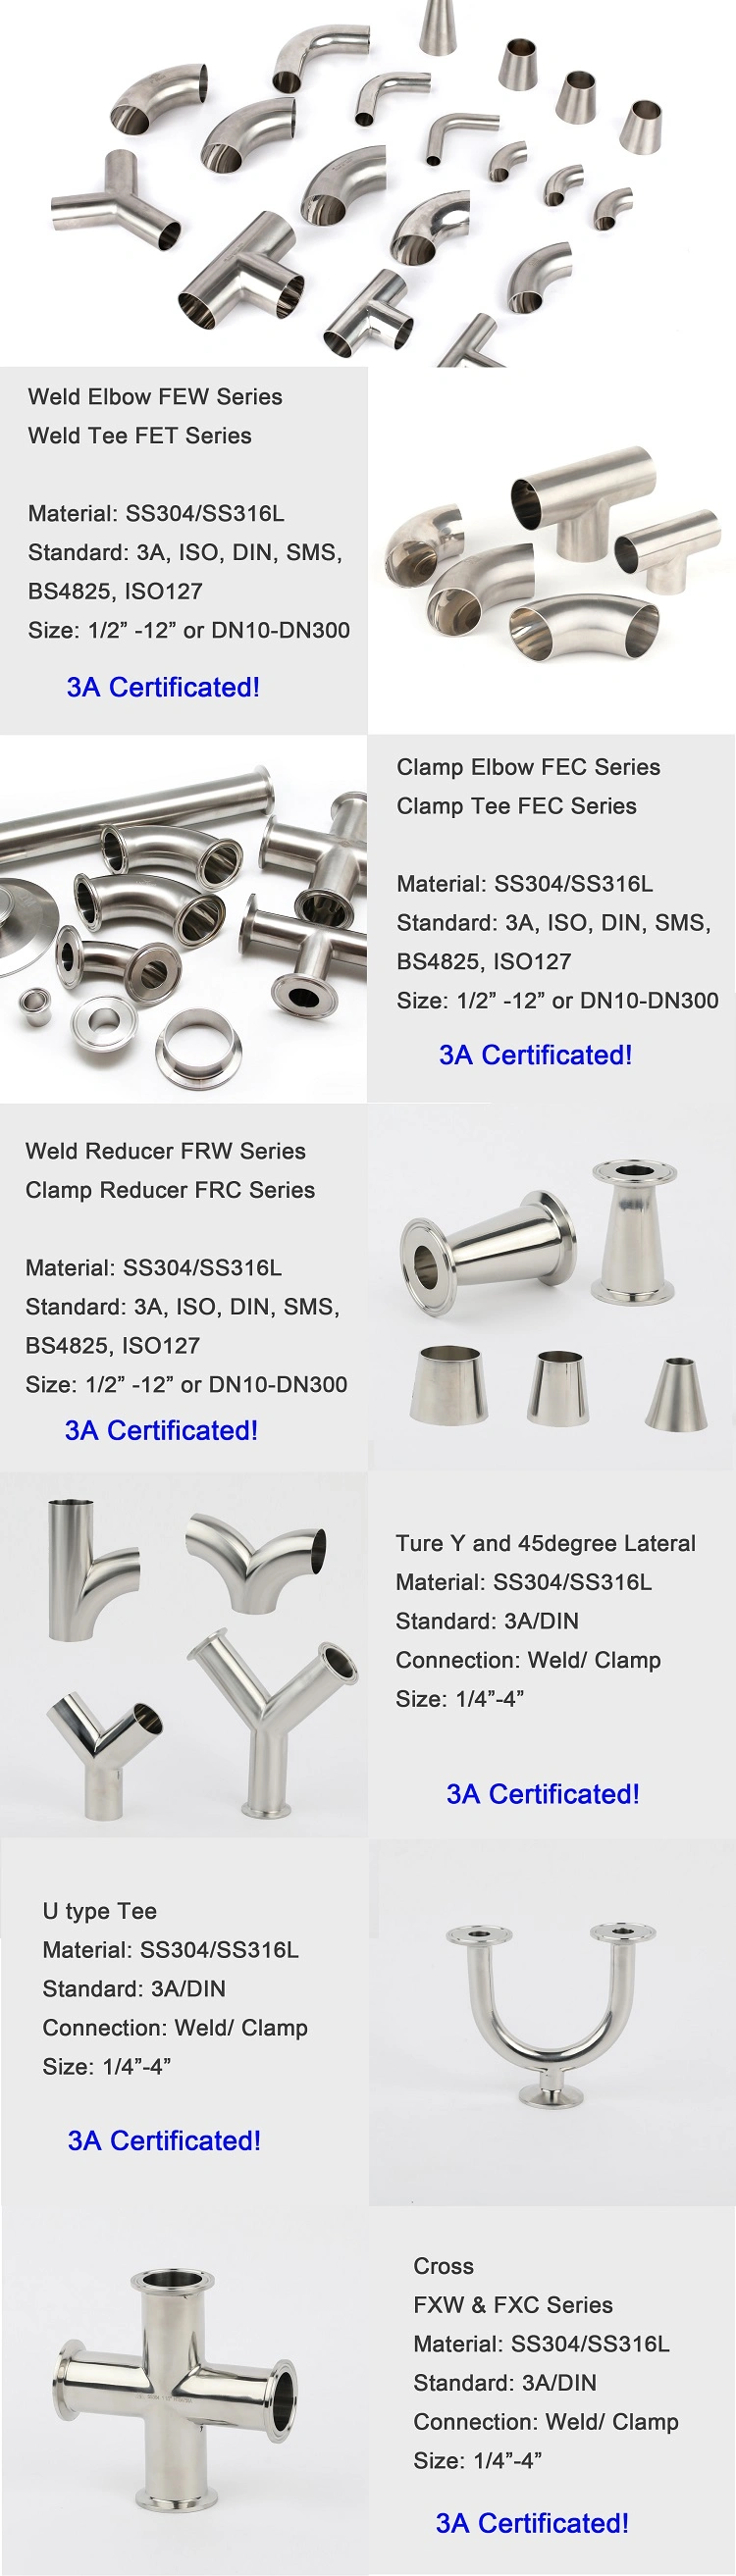 Sanitary Stainless Steel Pipe Fittings Tube Fittings/Elbow/Ferrule with 3A